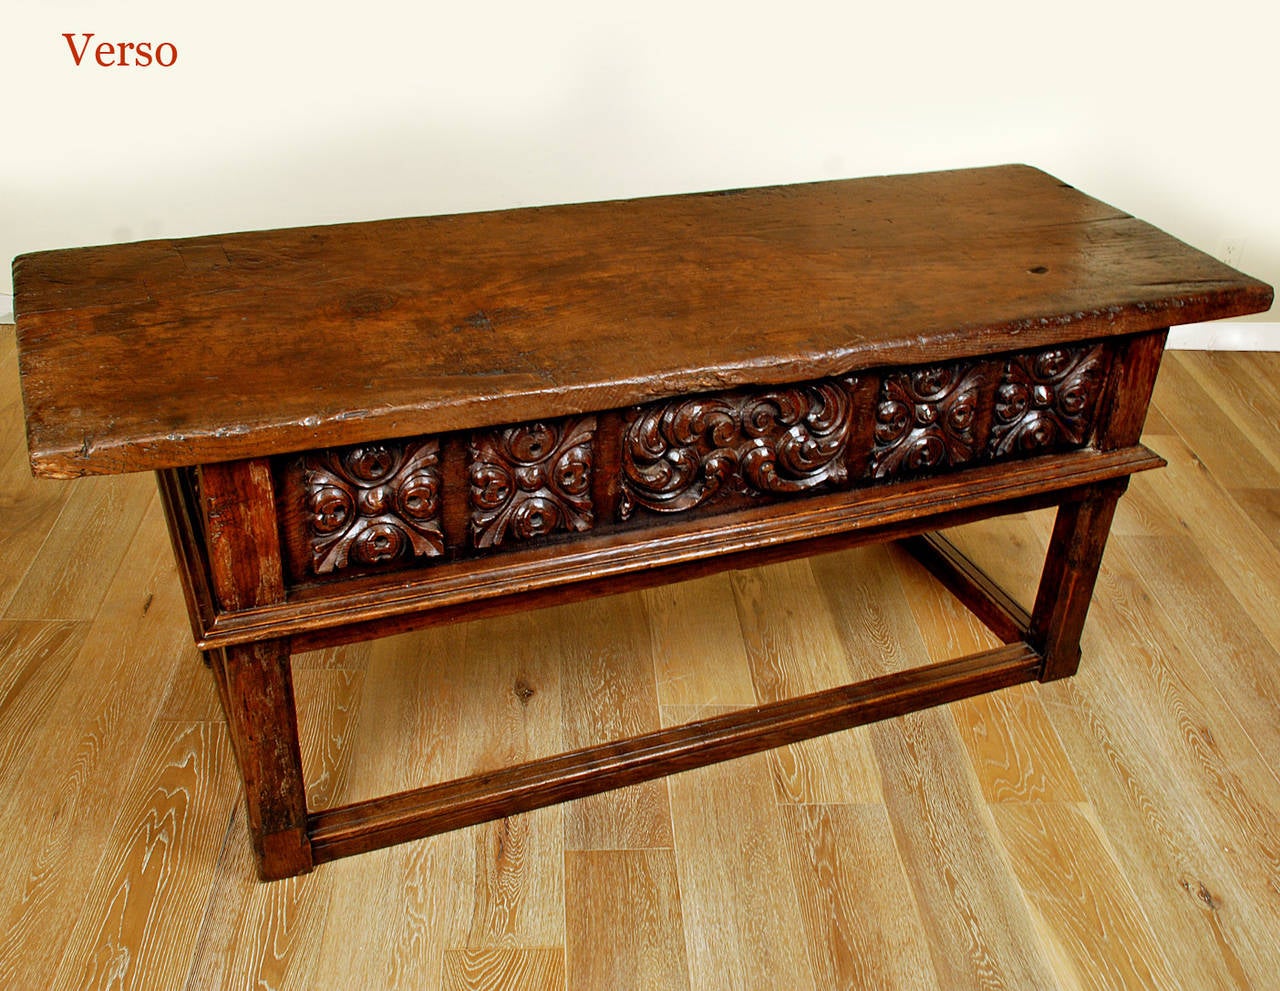 Late 17th Century Spanish Baroque Period Chestnut Kneehole Desk For Sale 4